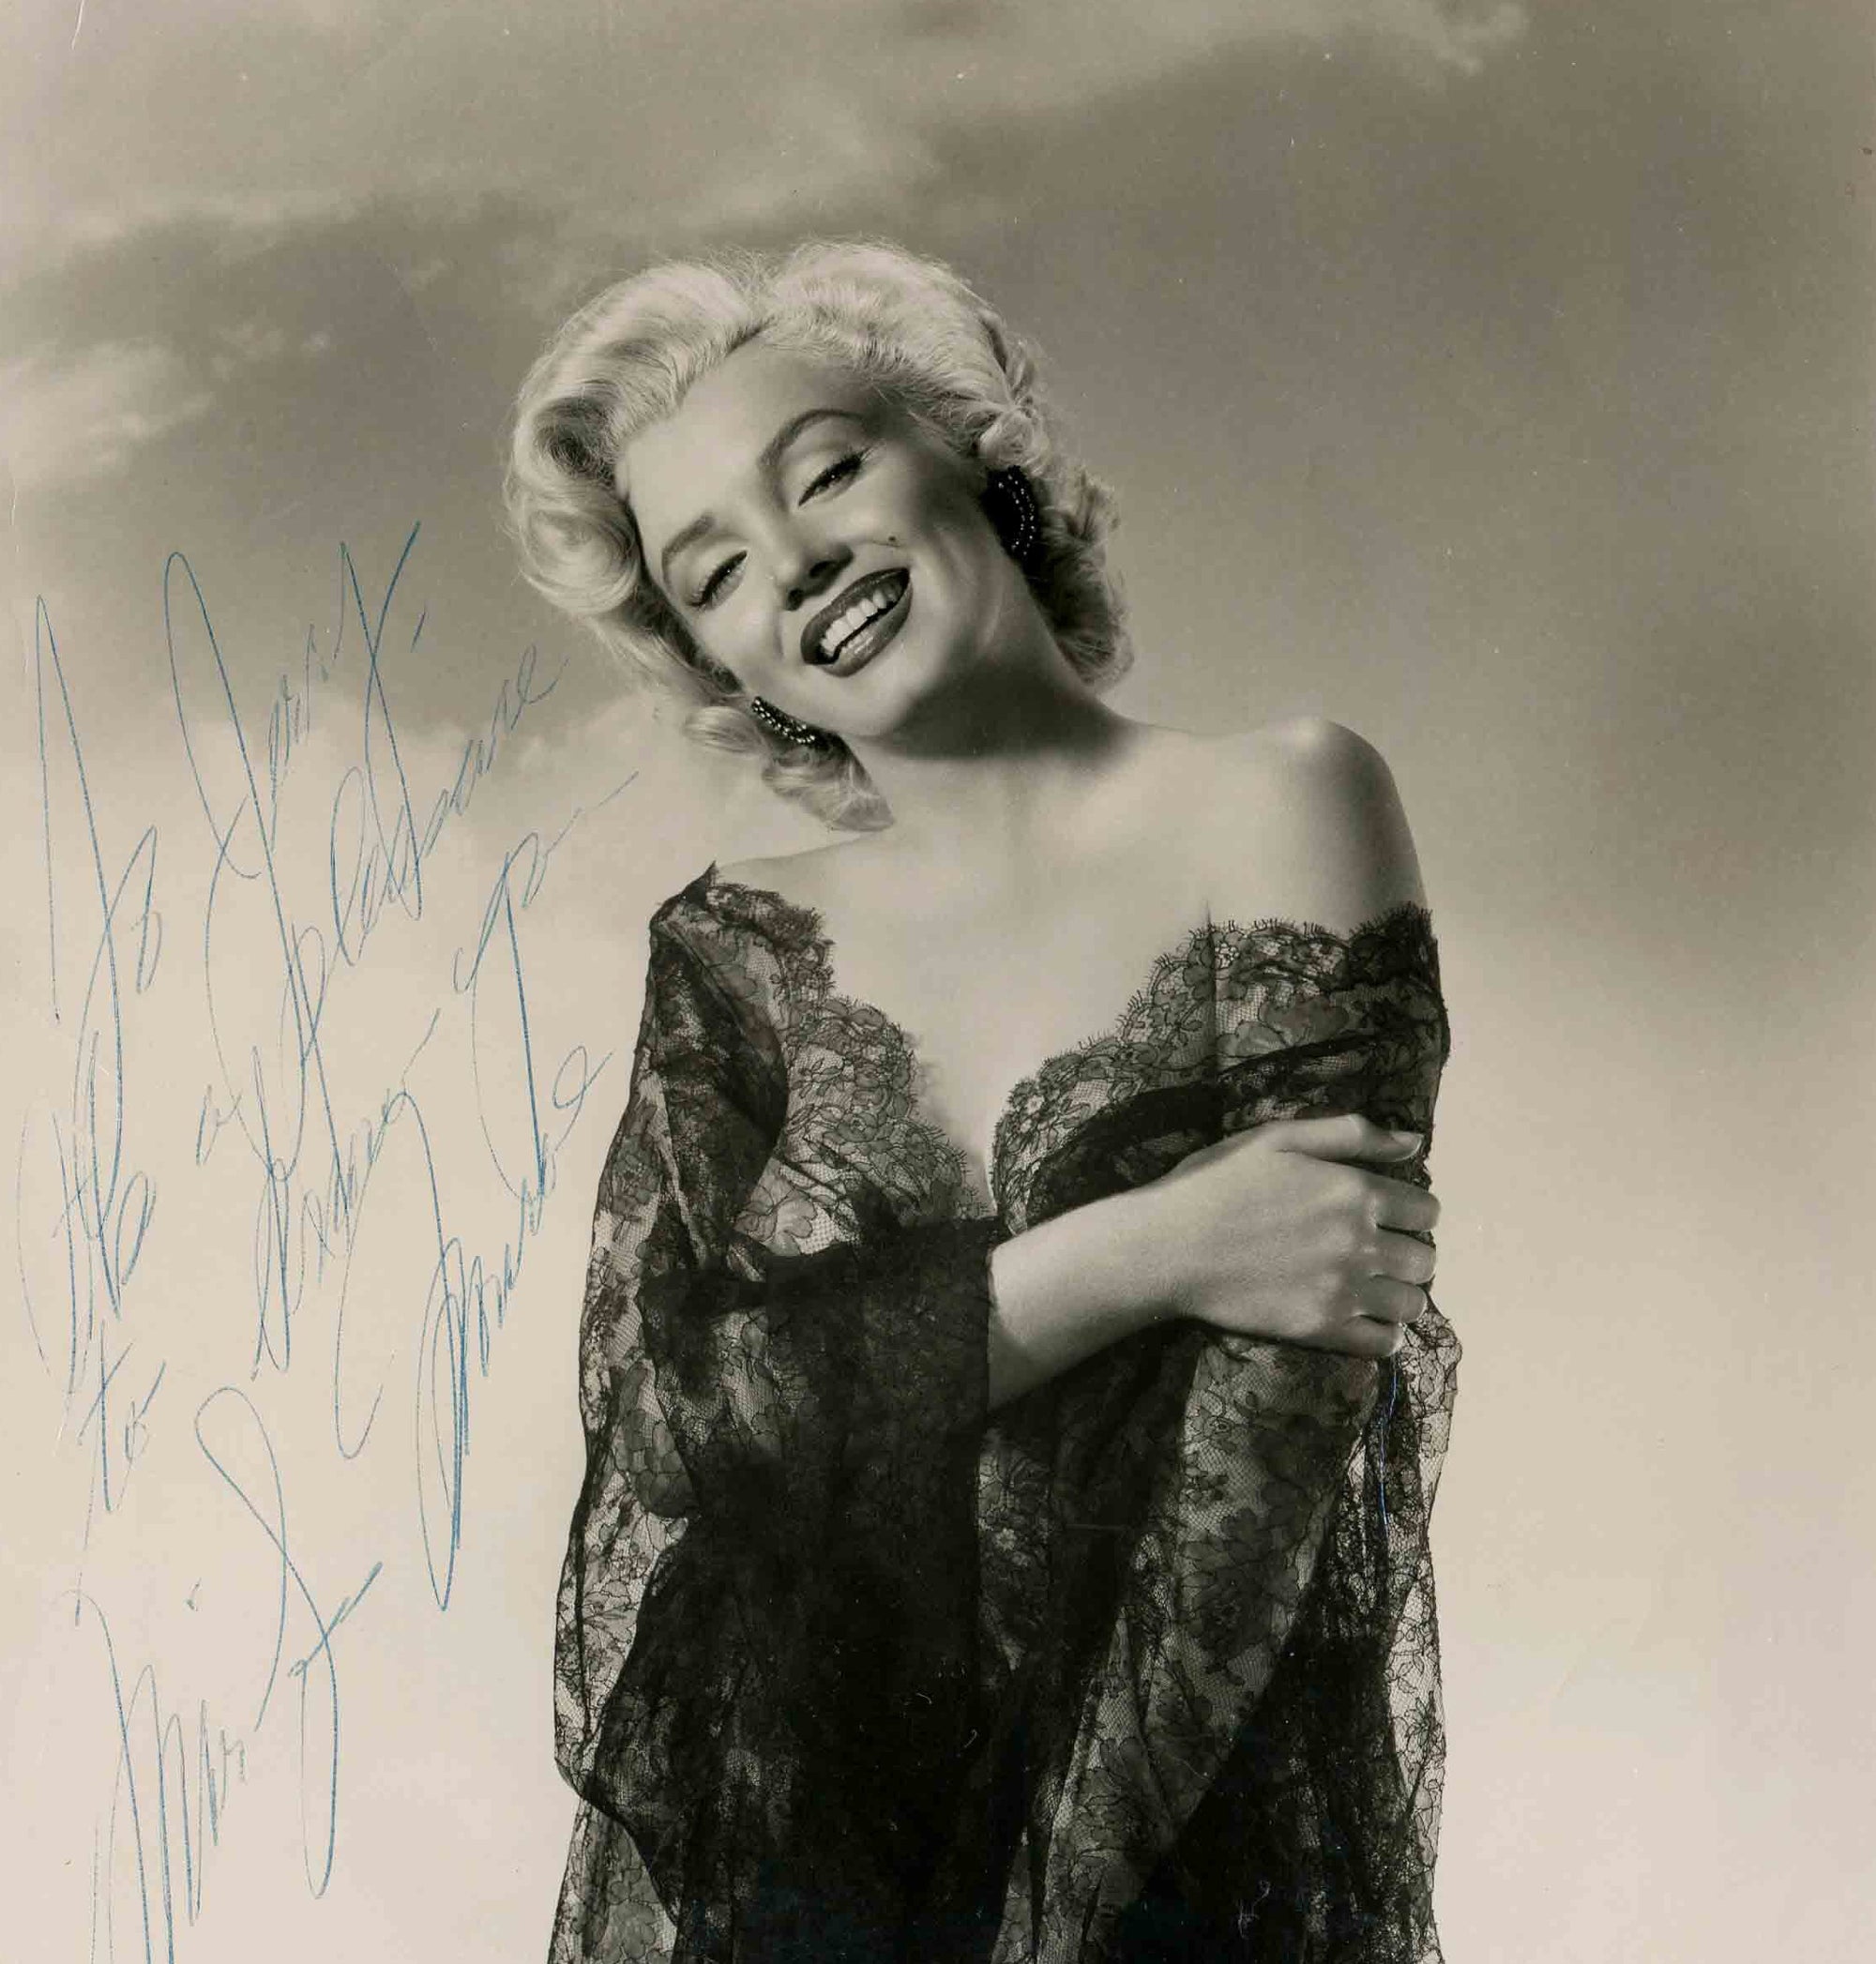 Marilyn Monroe Signed Photograph Expected to Attain $12,000-$14,000